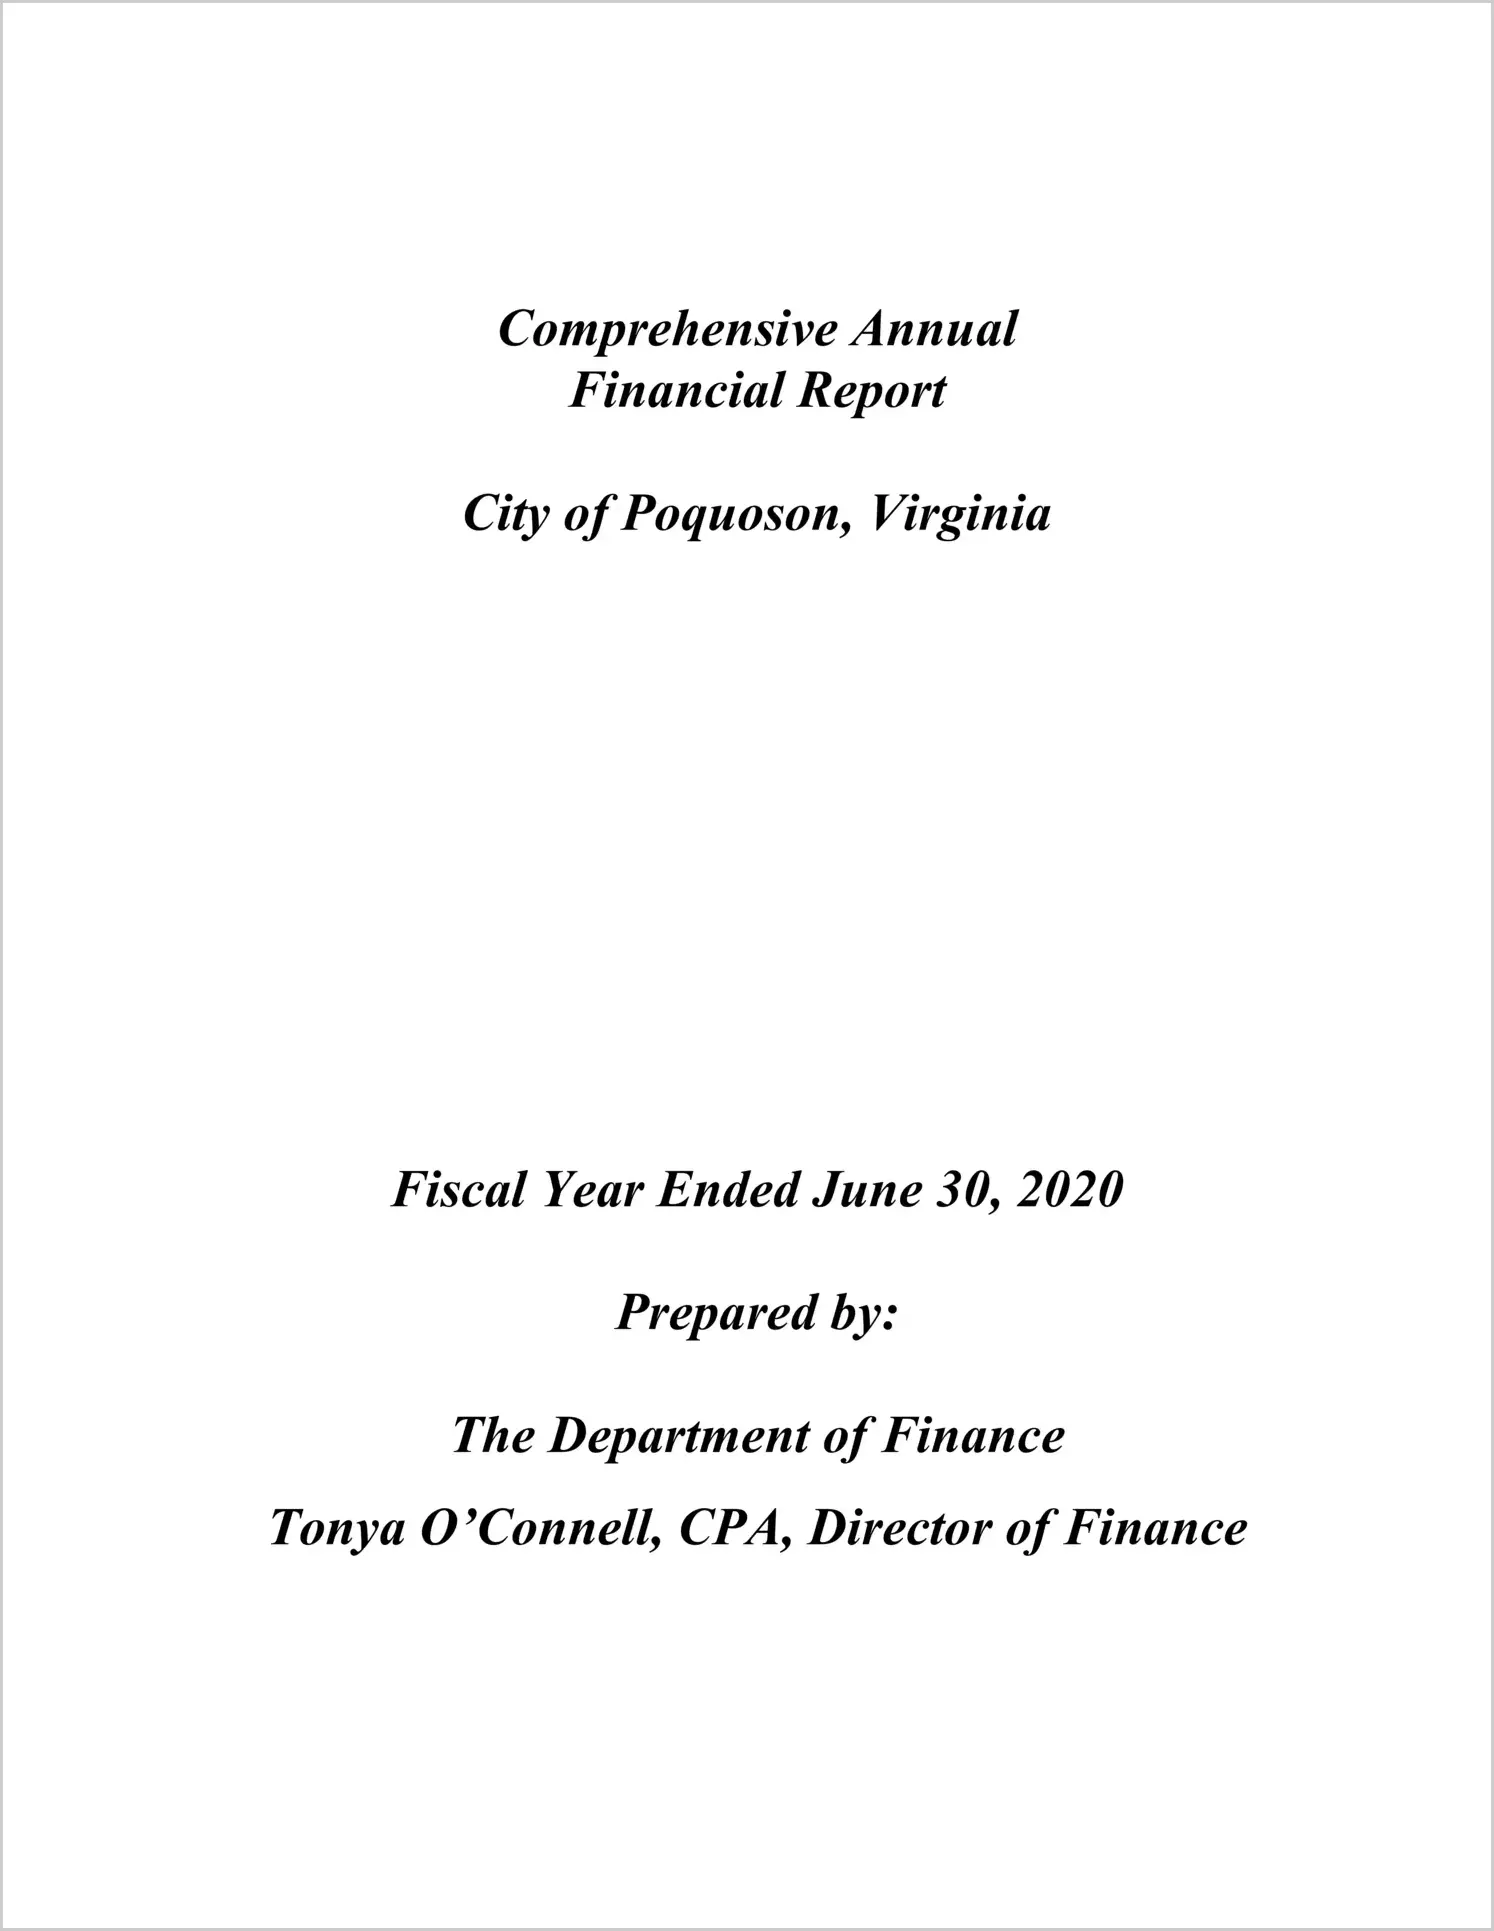 2020 Annual Financial Report for City of Poquoson